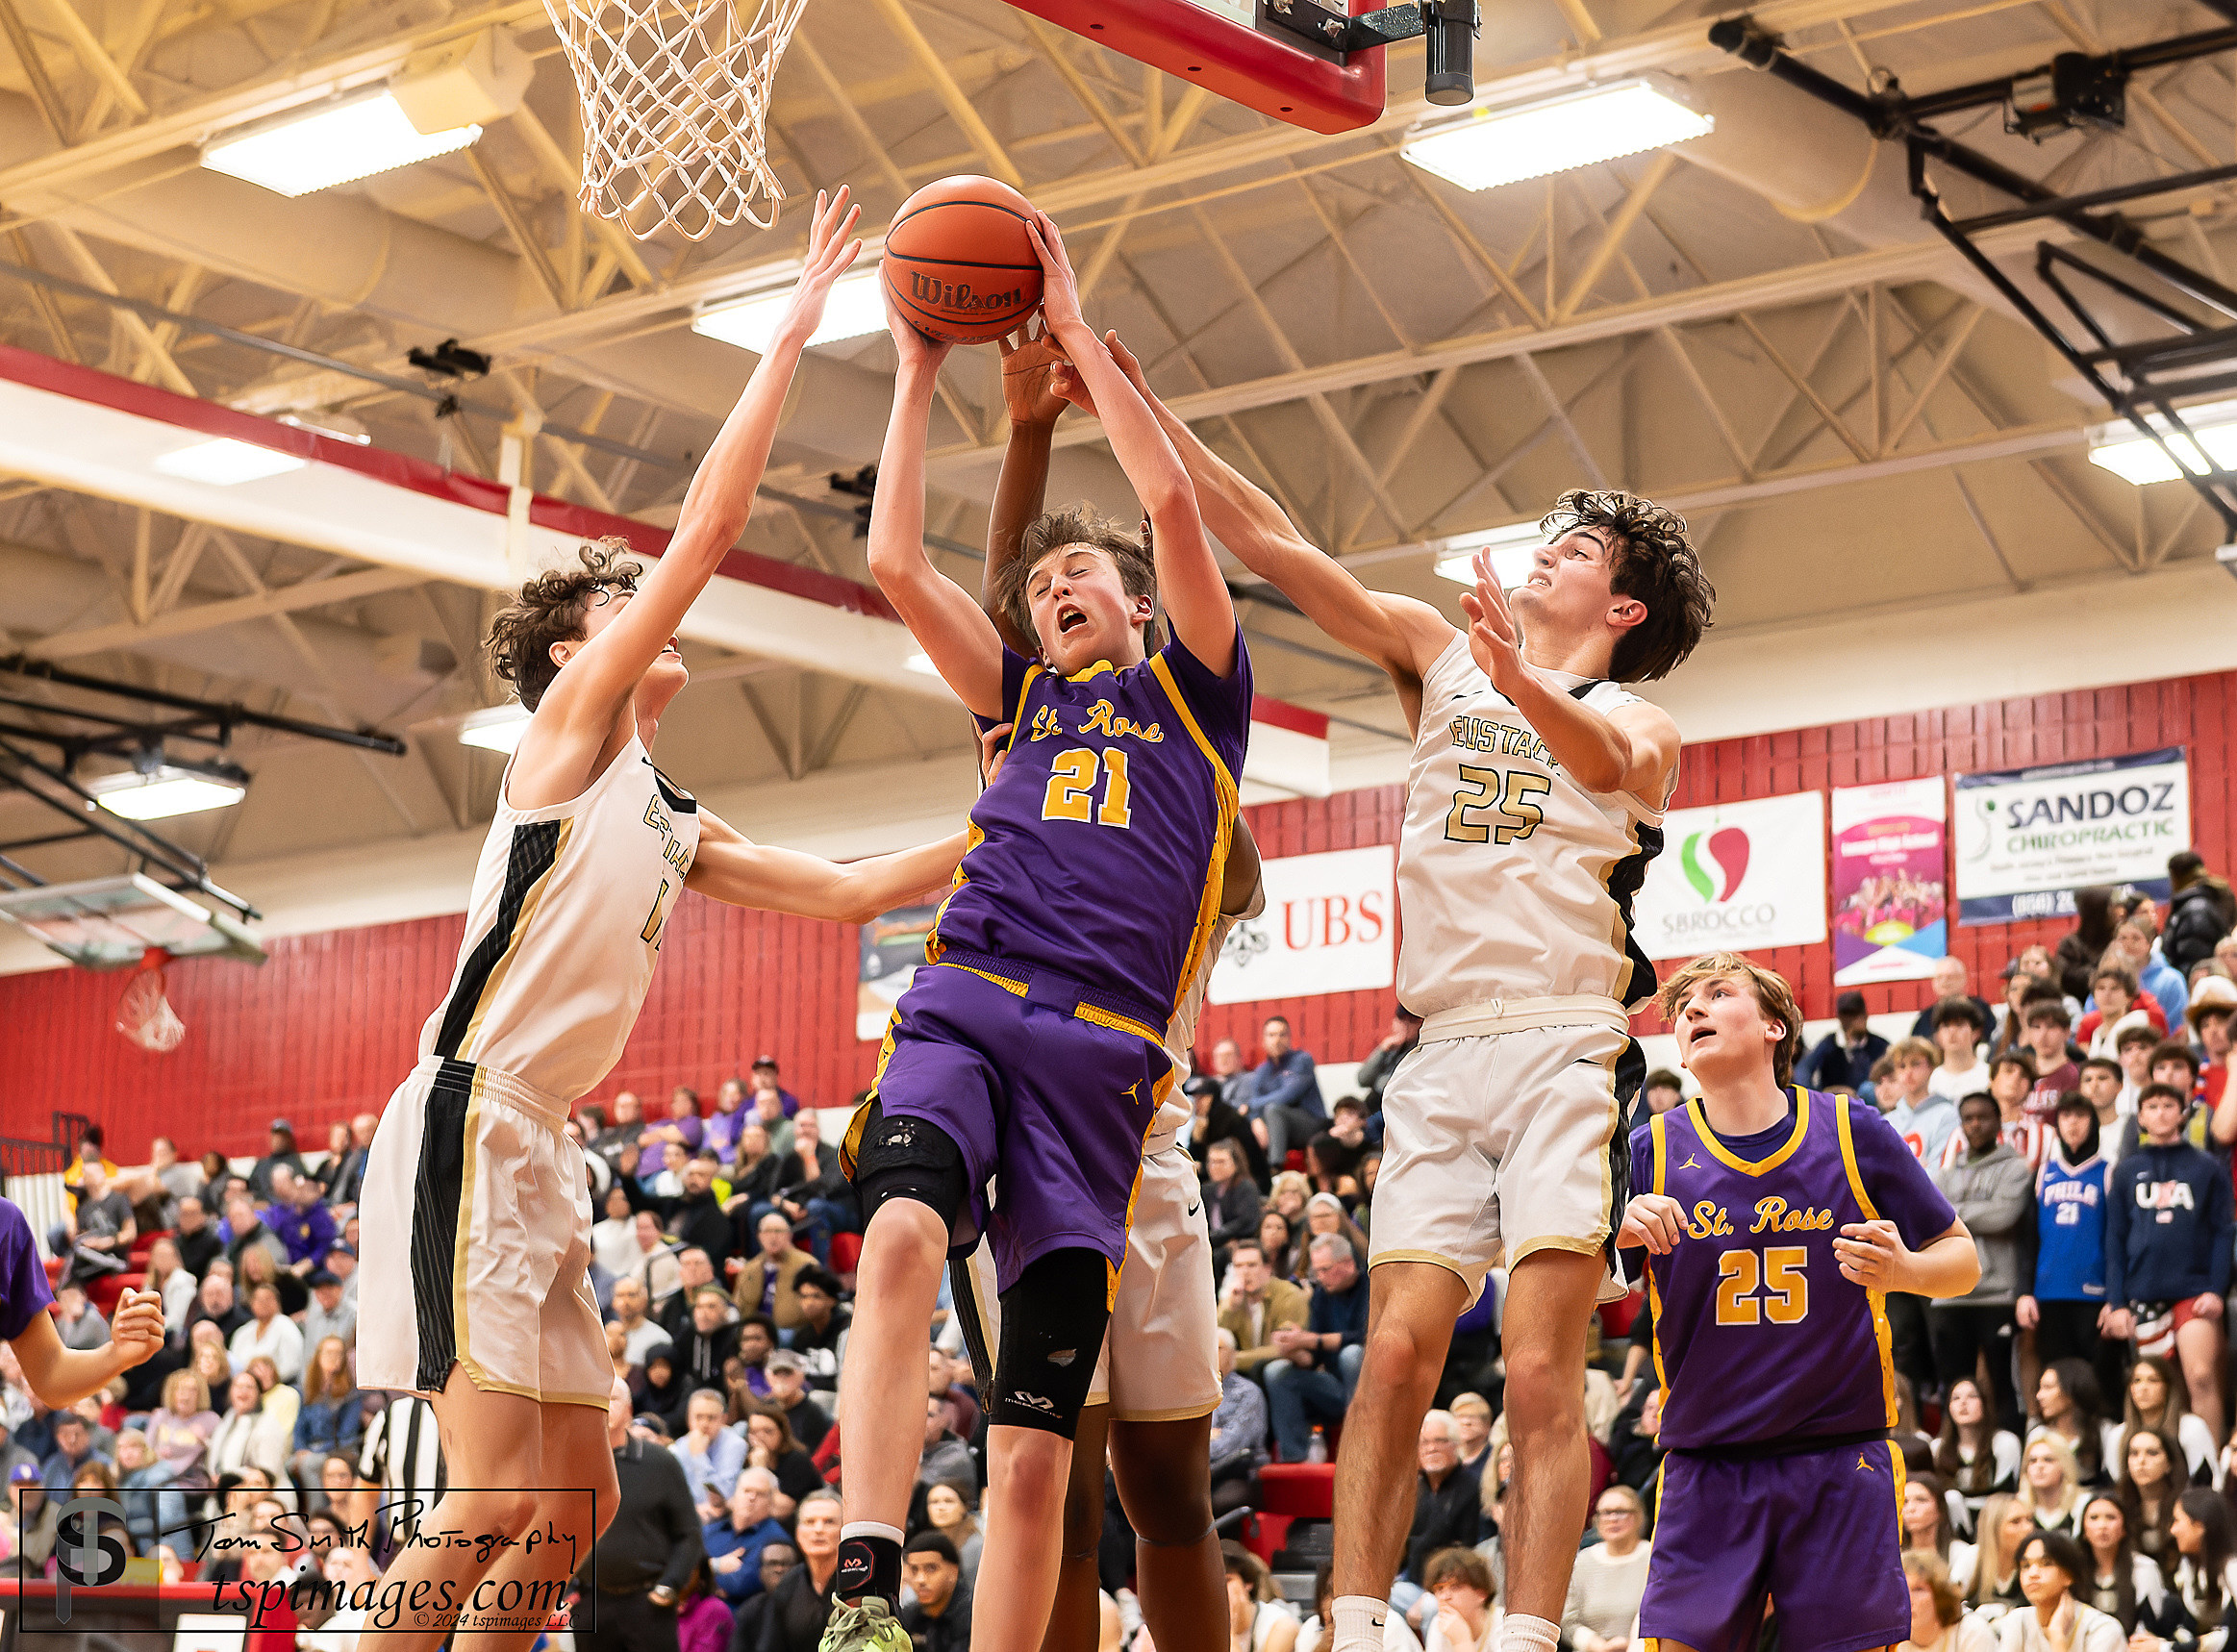 St. Rose freshman Avery Lynch goes up between Bishop Eustace defenders Dillon Adomagnis (left) and Tom Samiraglo.(Photo: Tom Smith | tspsportsimages.com)